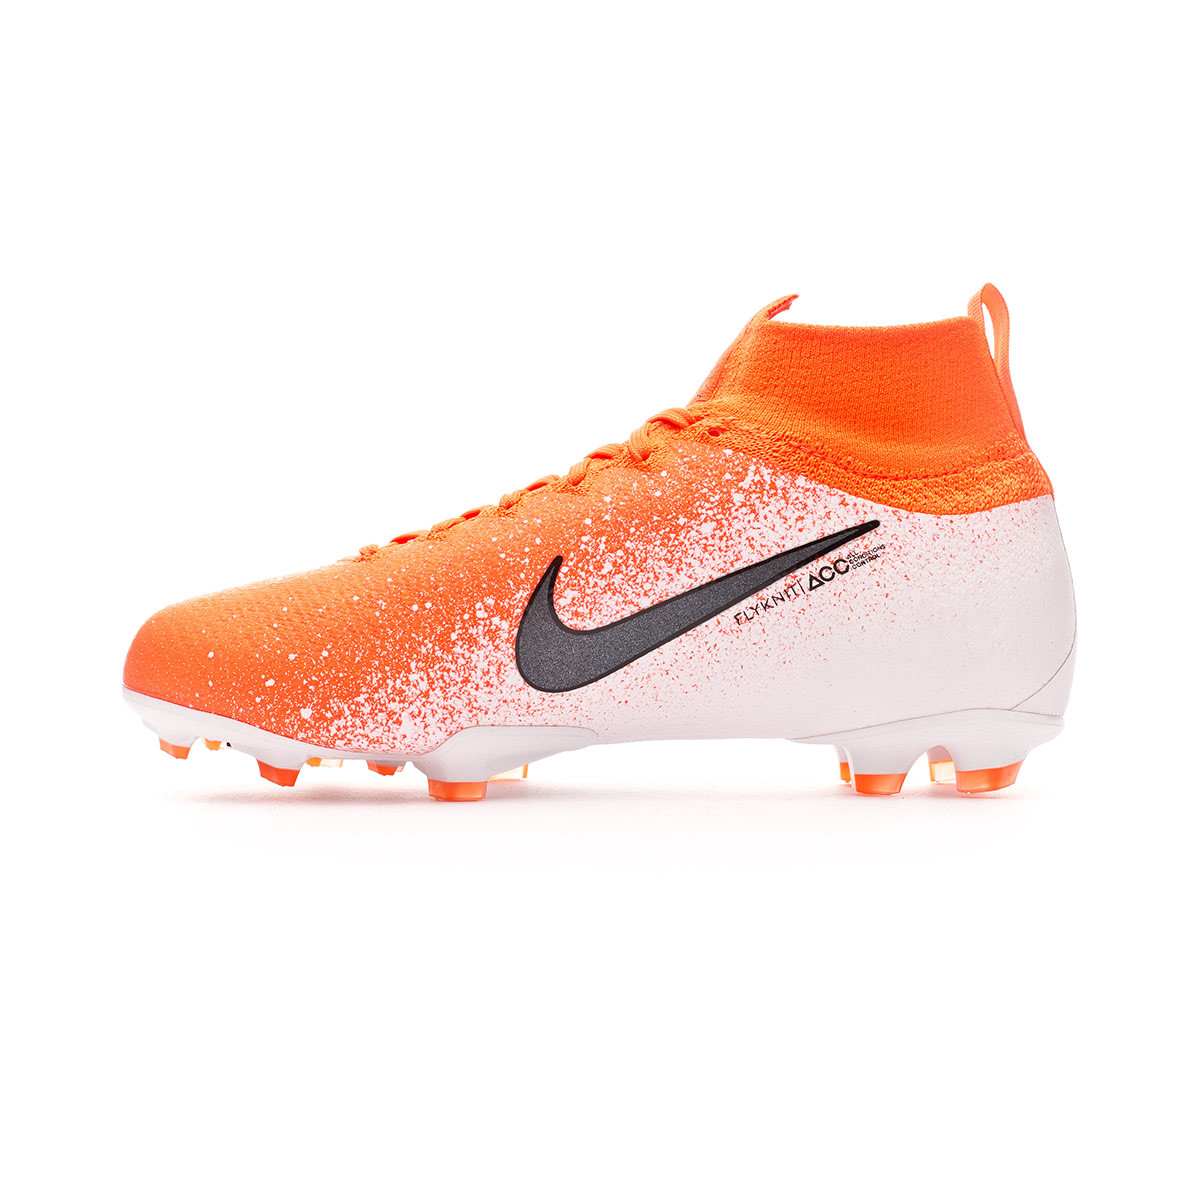 Nike Mercurial Superfly VI Elite FG Soccer Cleat Wolf Gray.